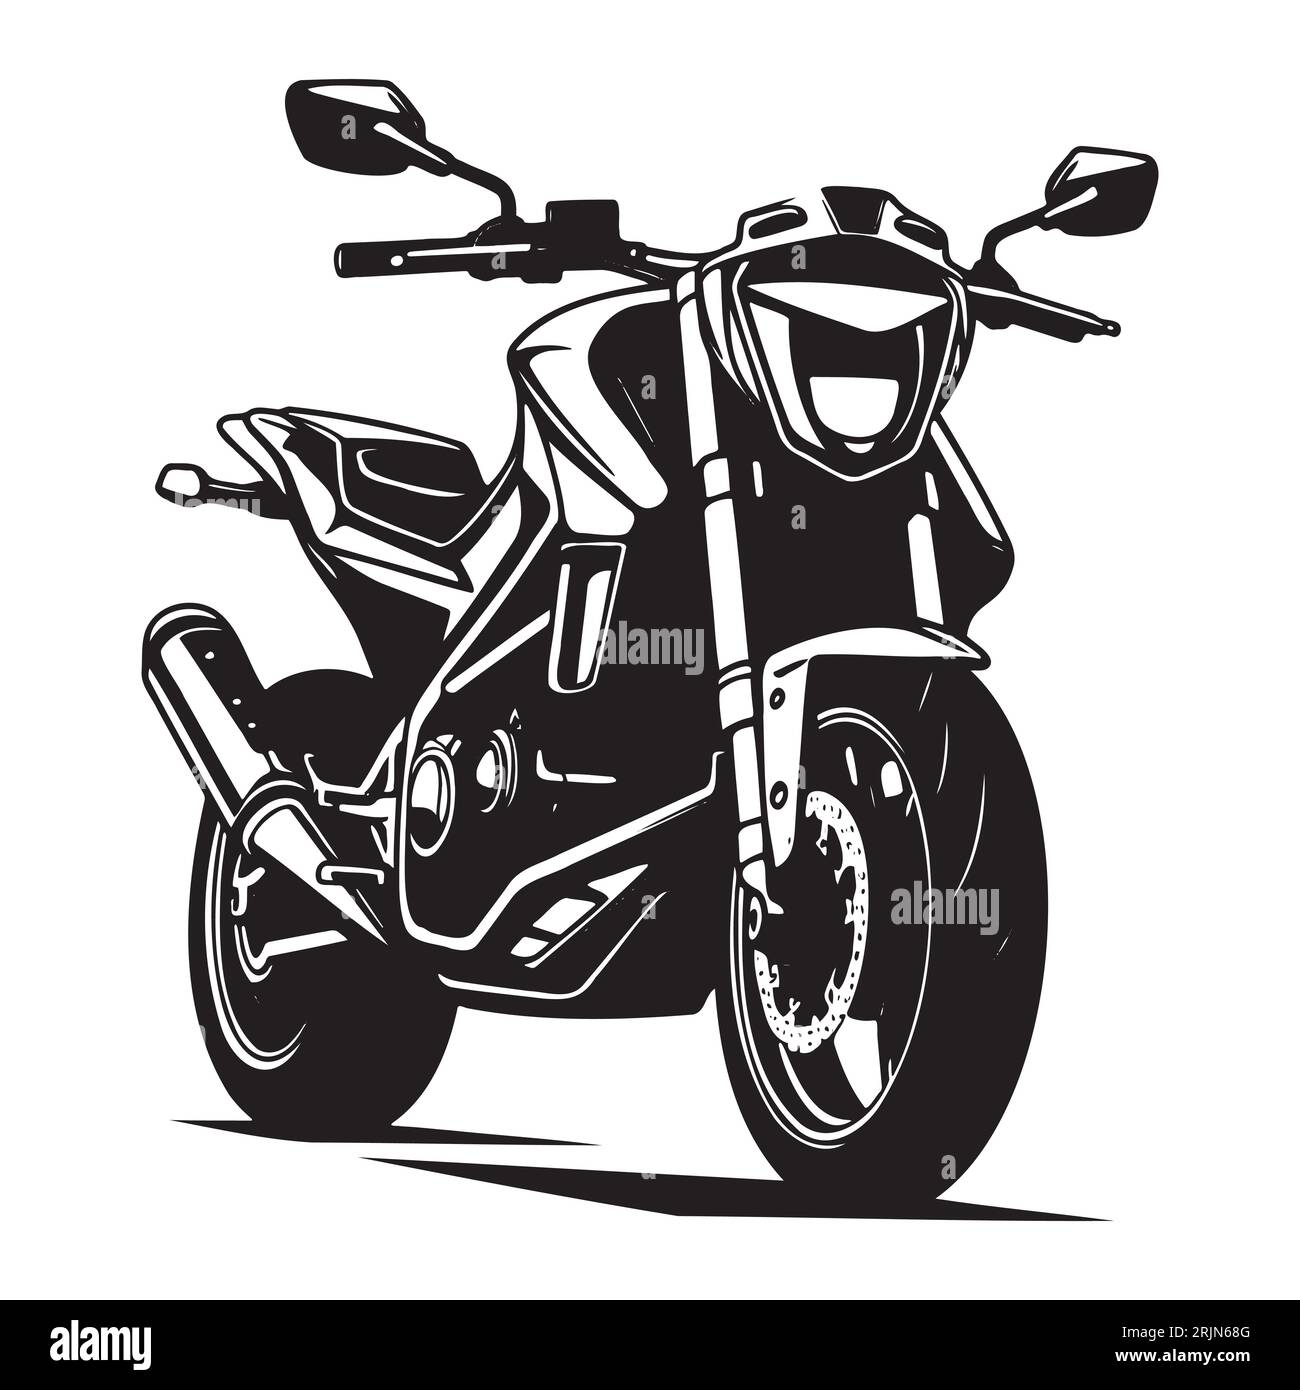 Motorcycle icon or sign. Vector black silhouette of a motorcycle. Stock Vector